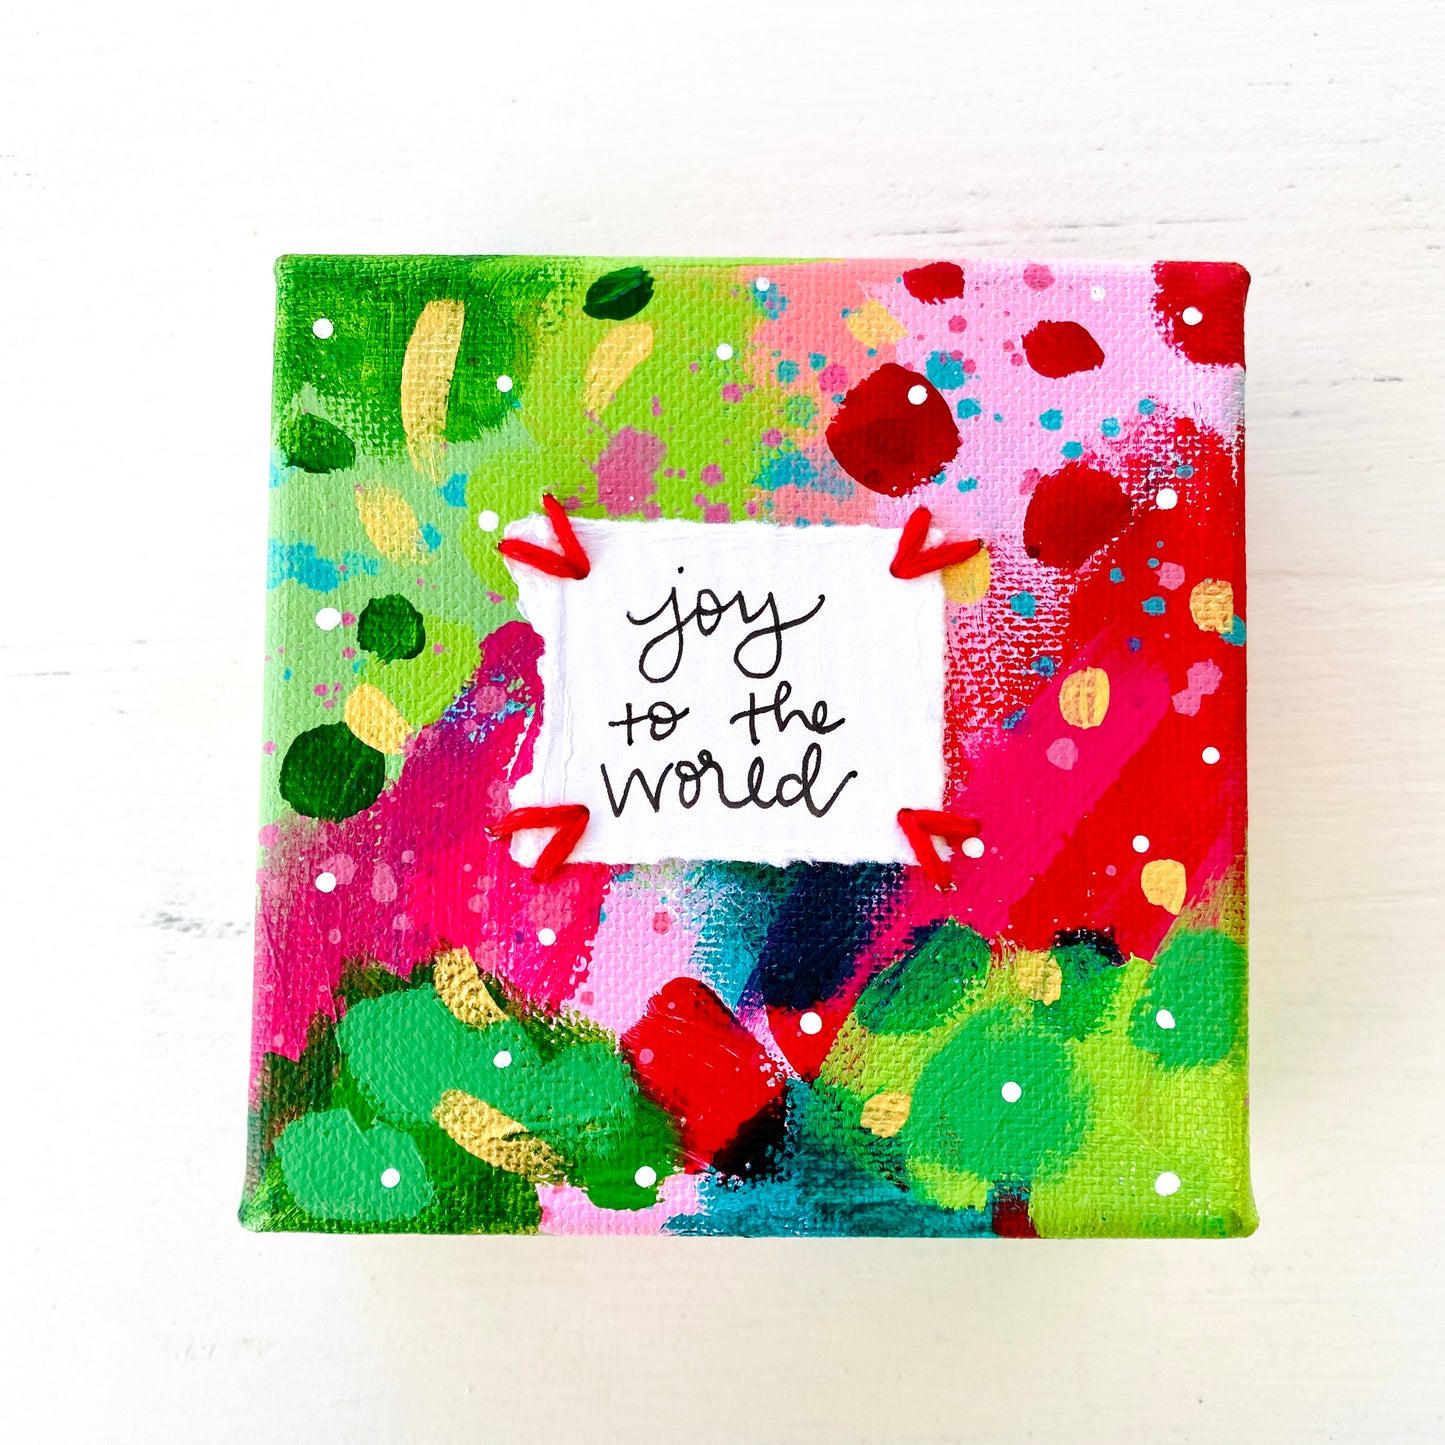 Joy to the World-1 4x4 inch original abstract canvas with embroidery thread accents